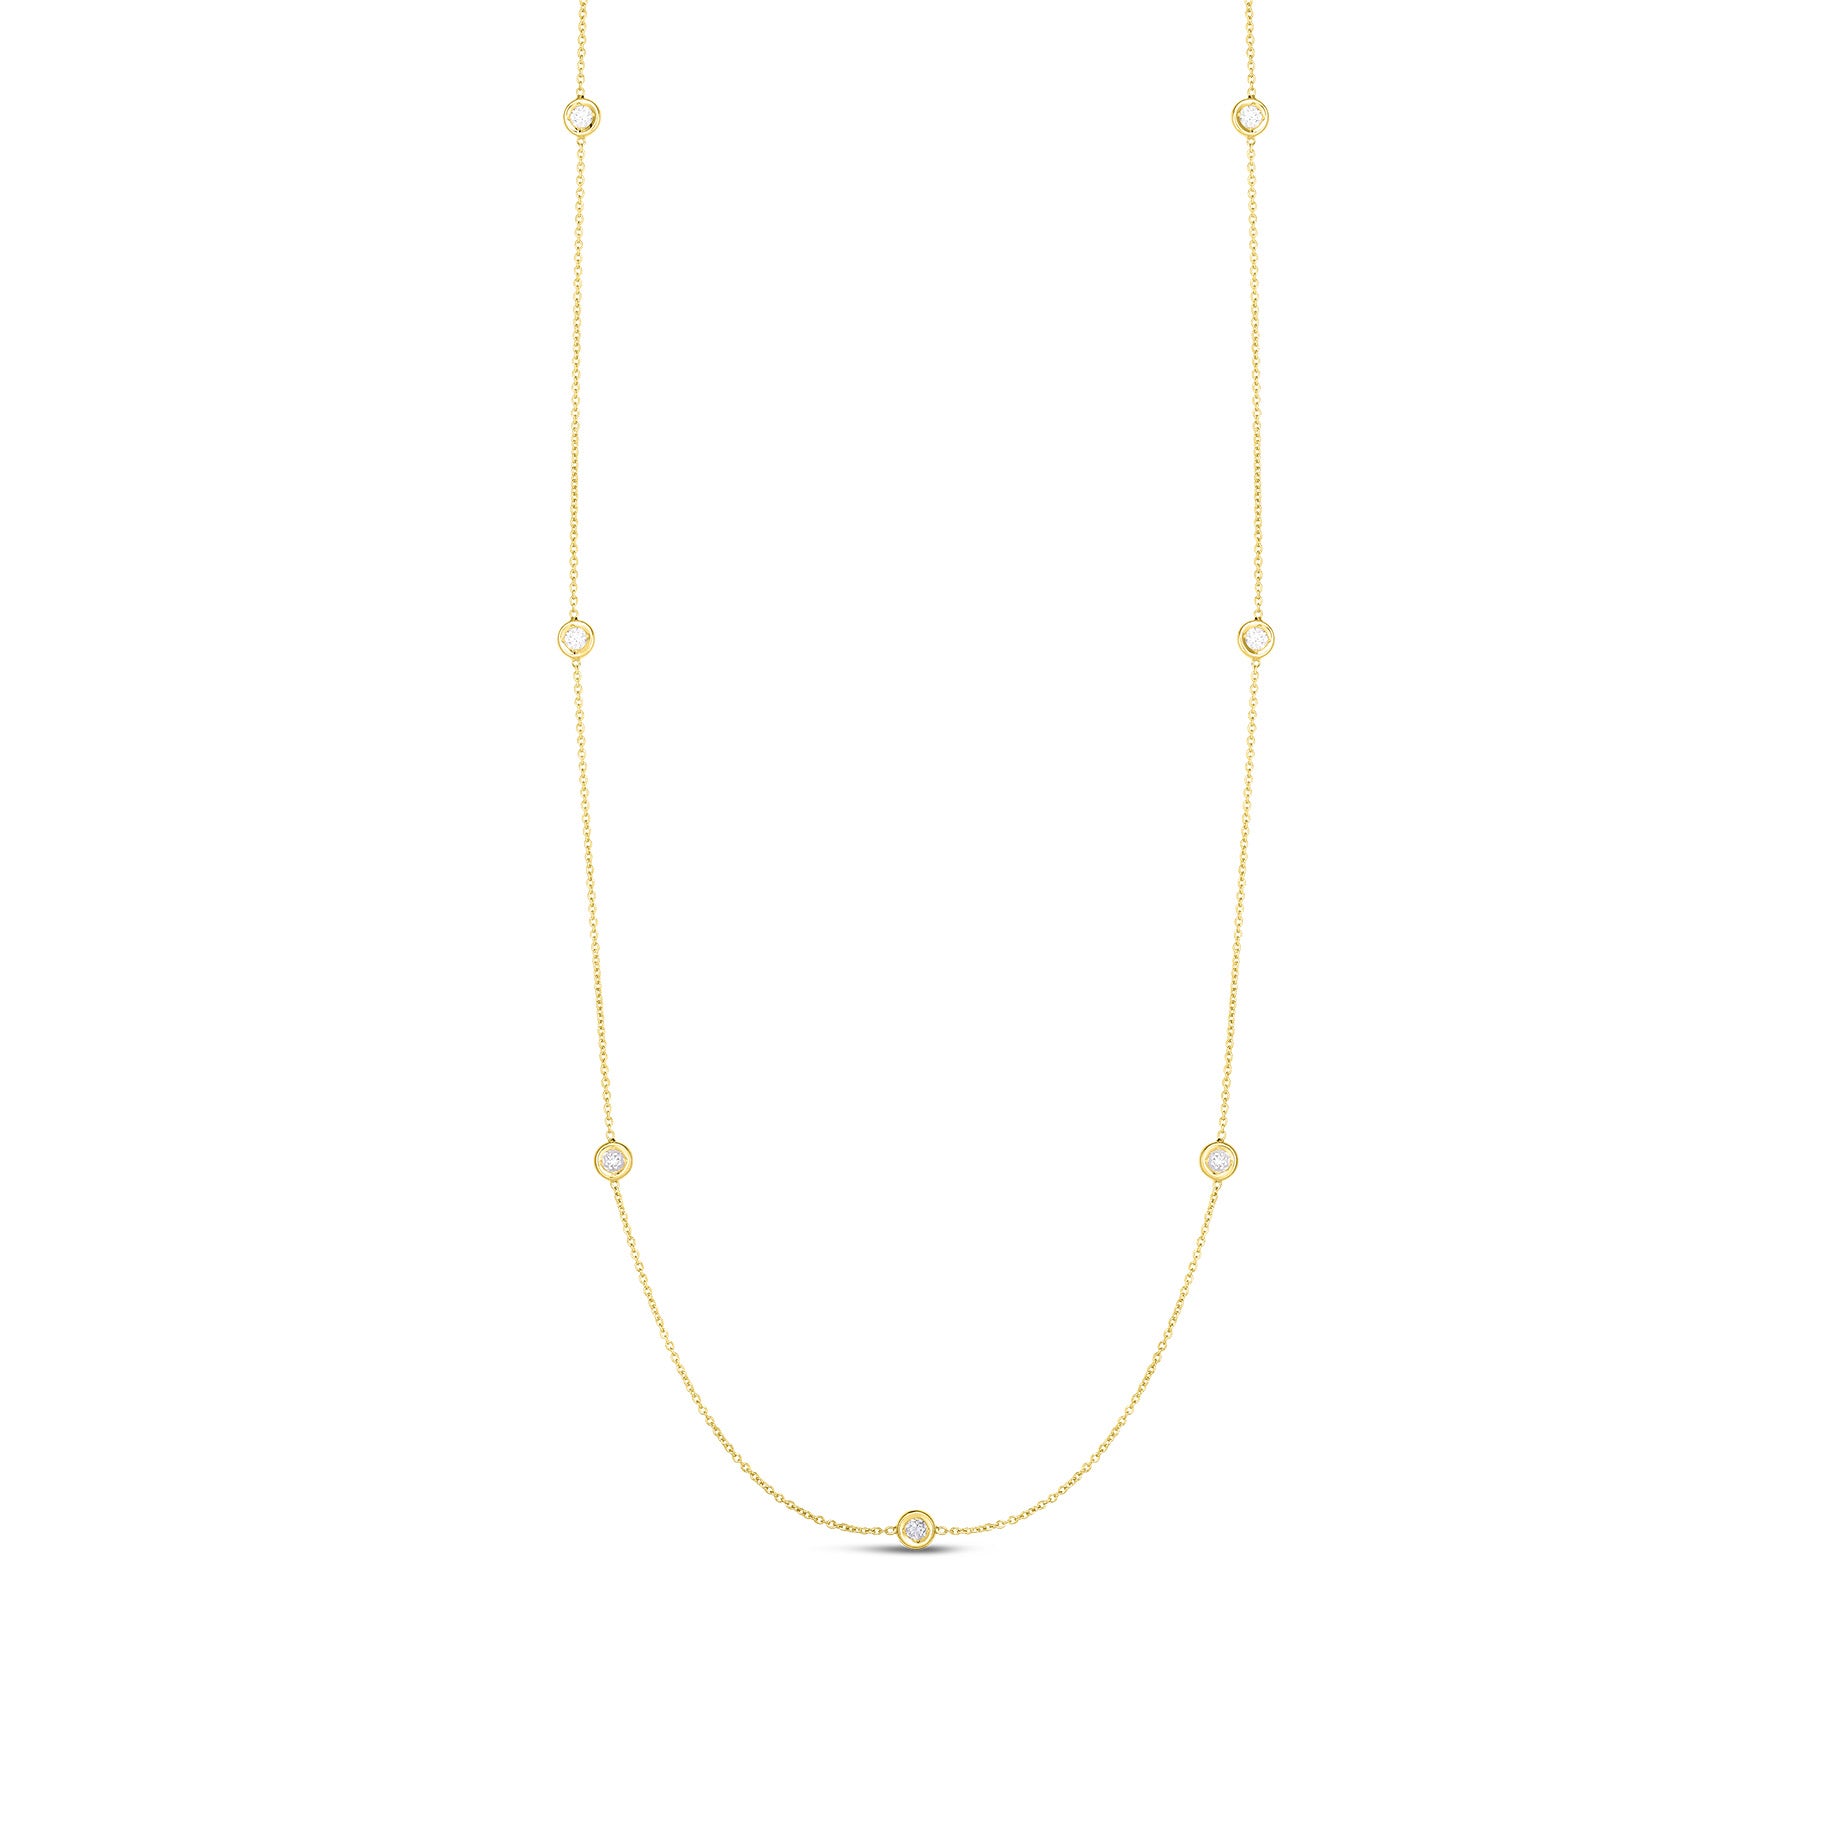 Roberto Coin 18k Yellow Gold Diamonds By The Inch Diamond Necklace